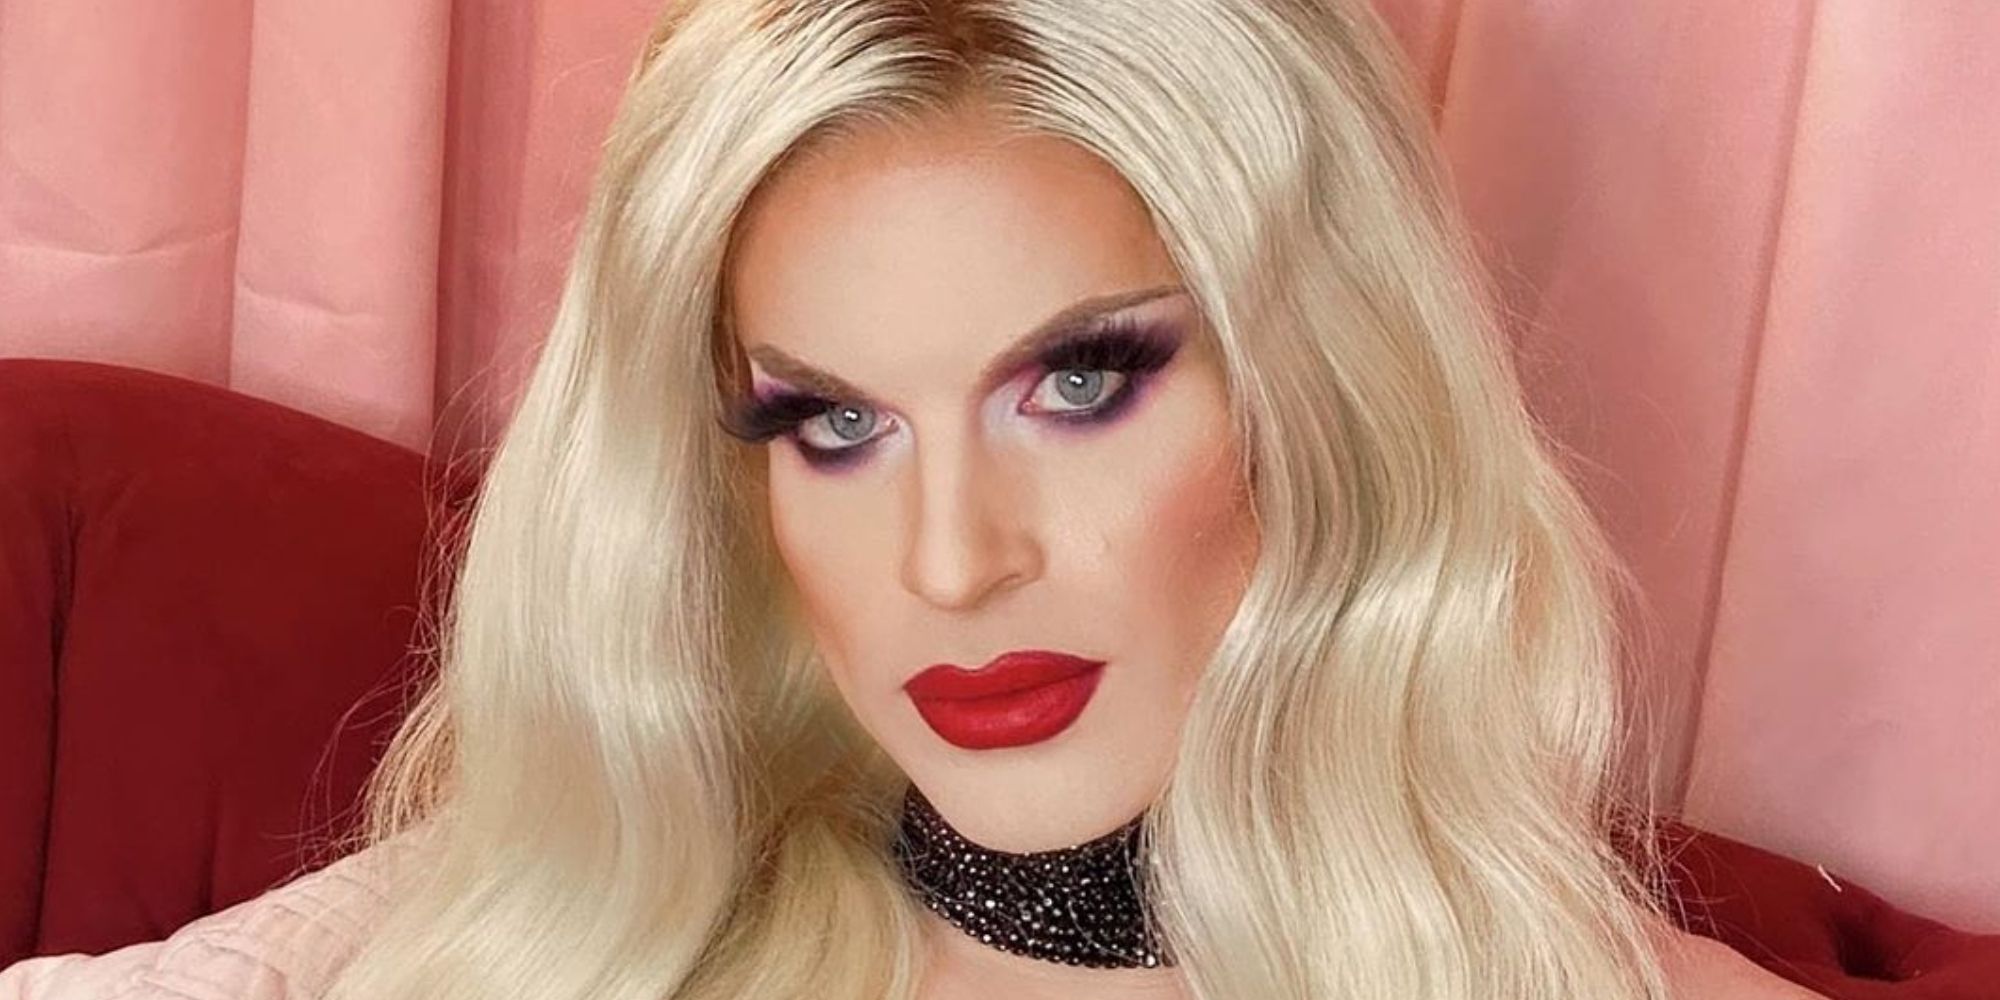 Drag queens with onlyfans